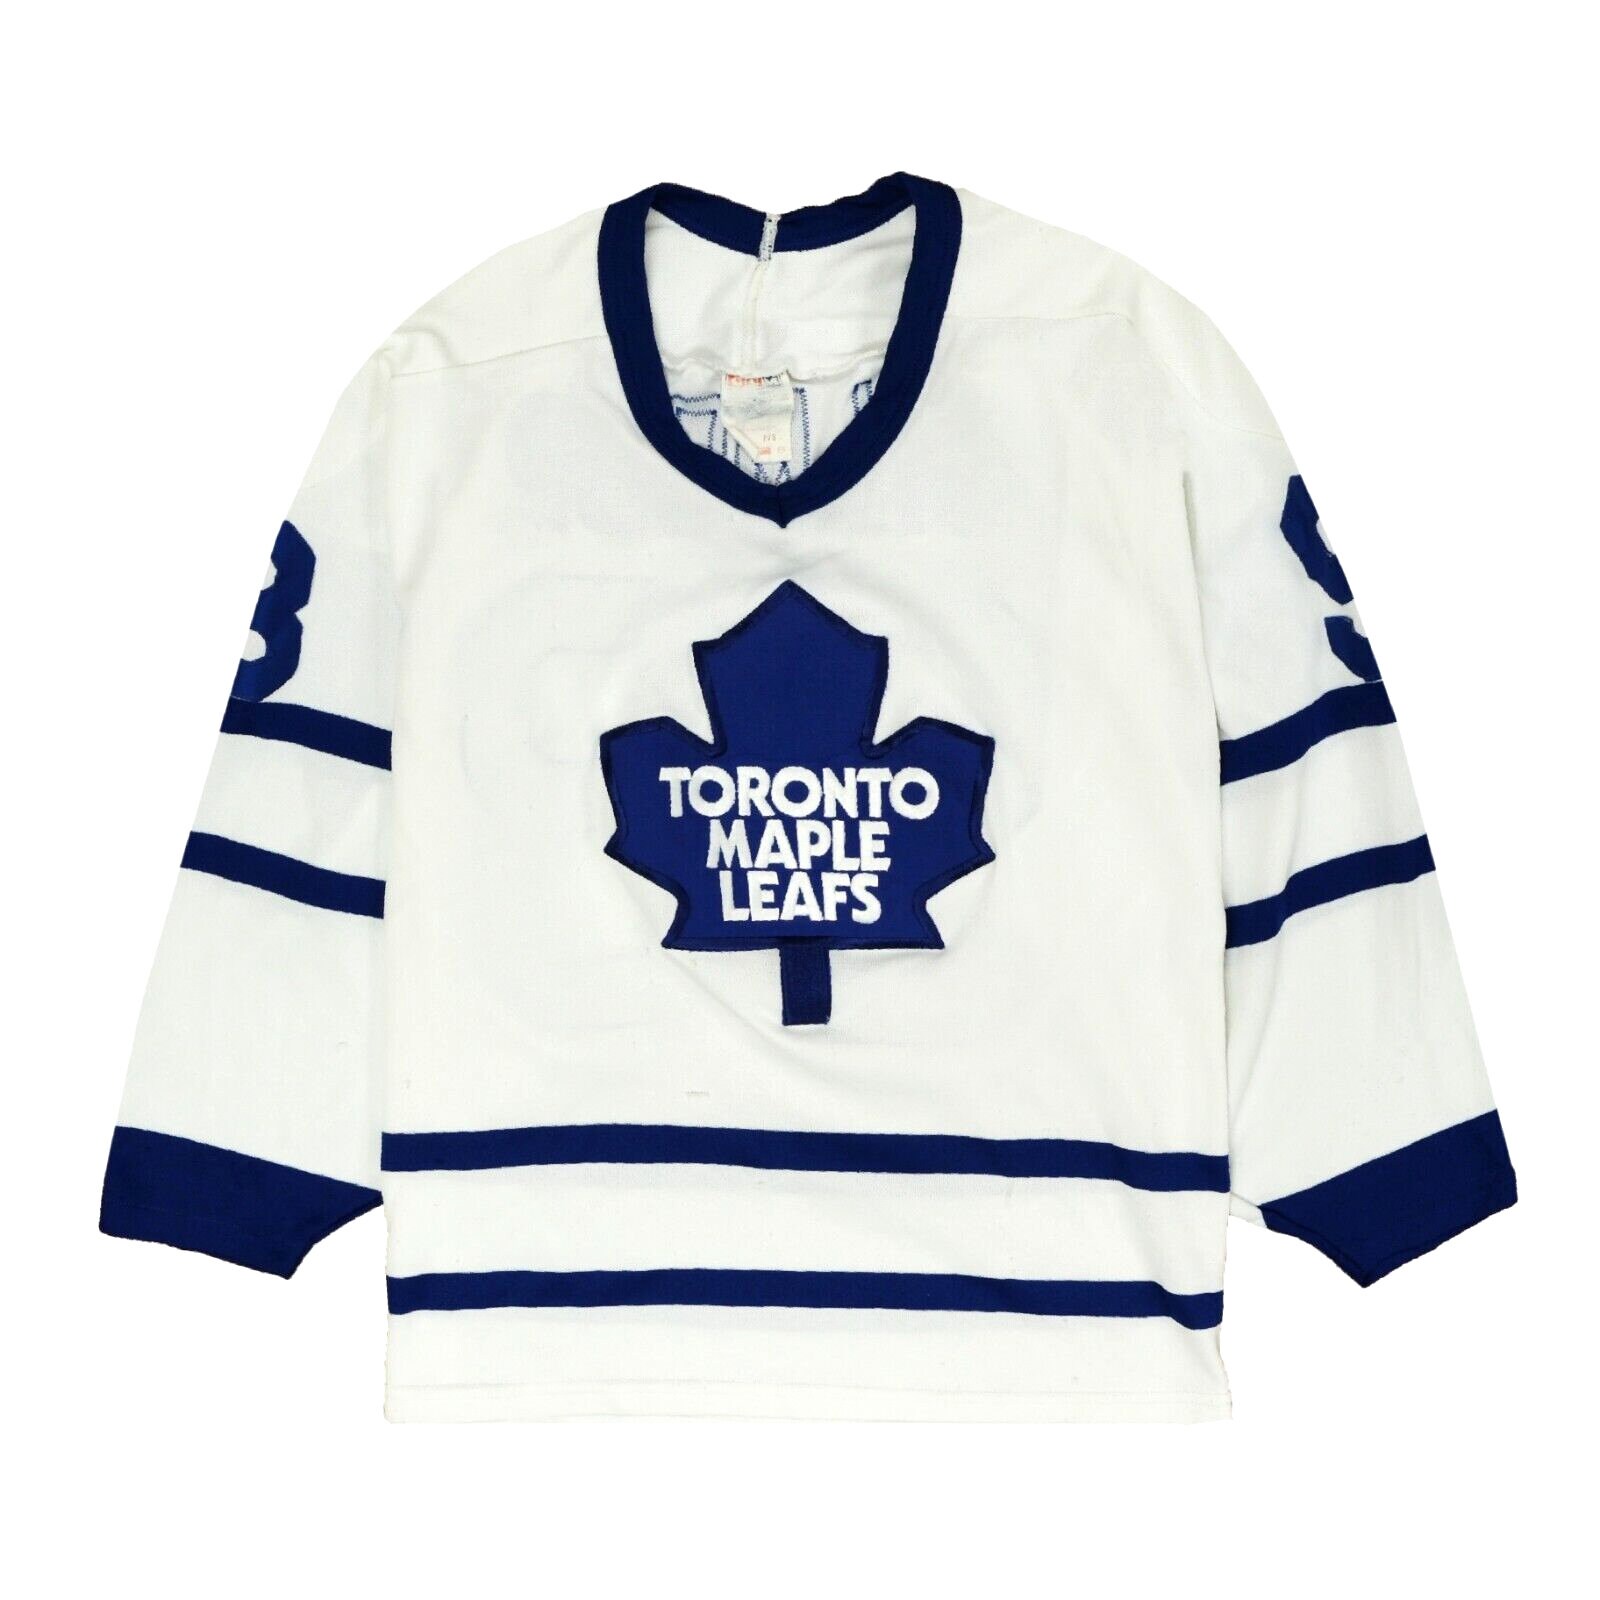 Doug Gilmour Autographed White Toronto Maple Leafs Jersey at